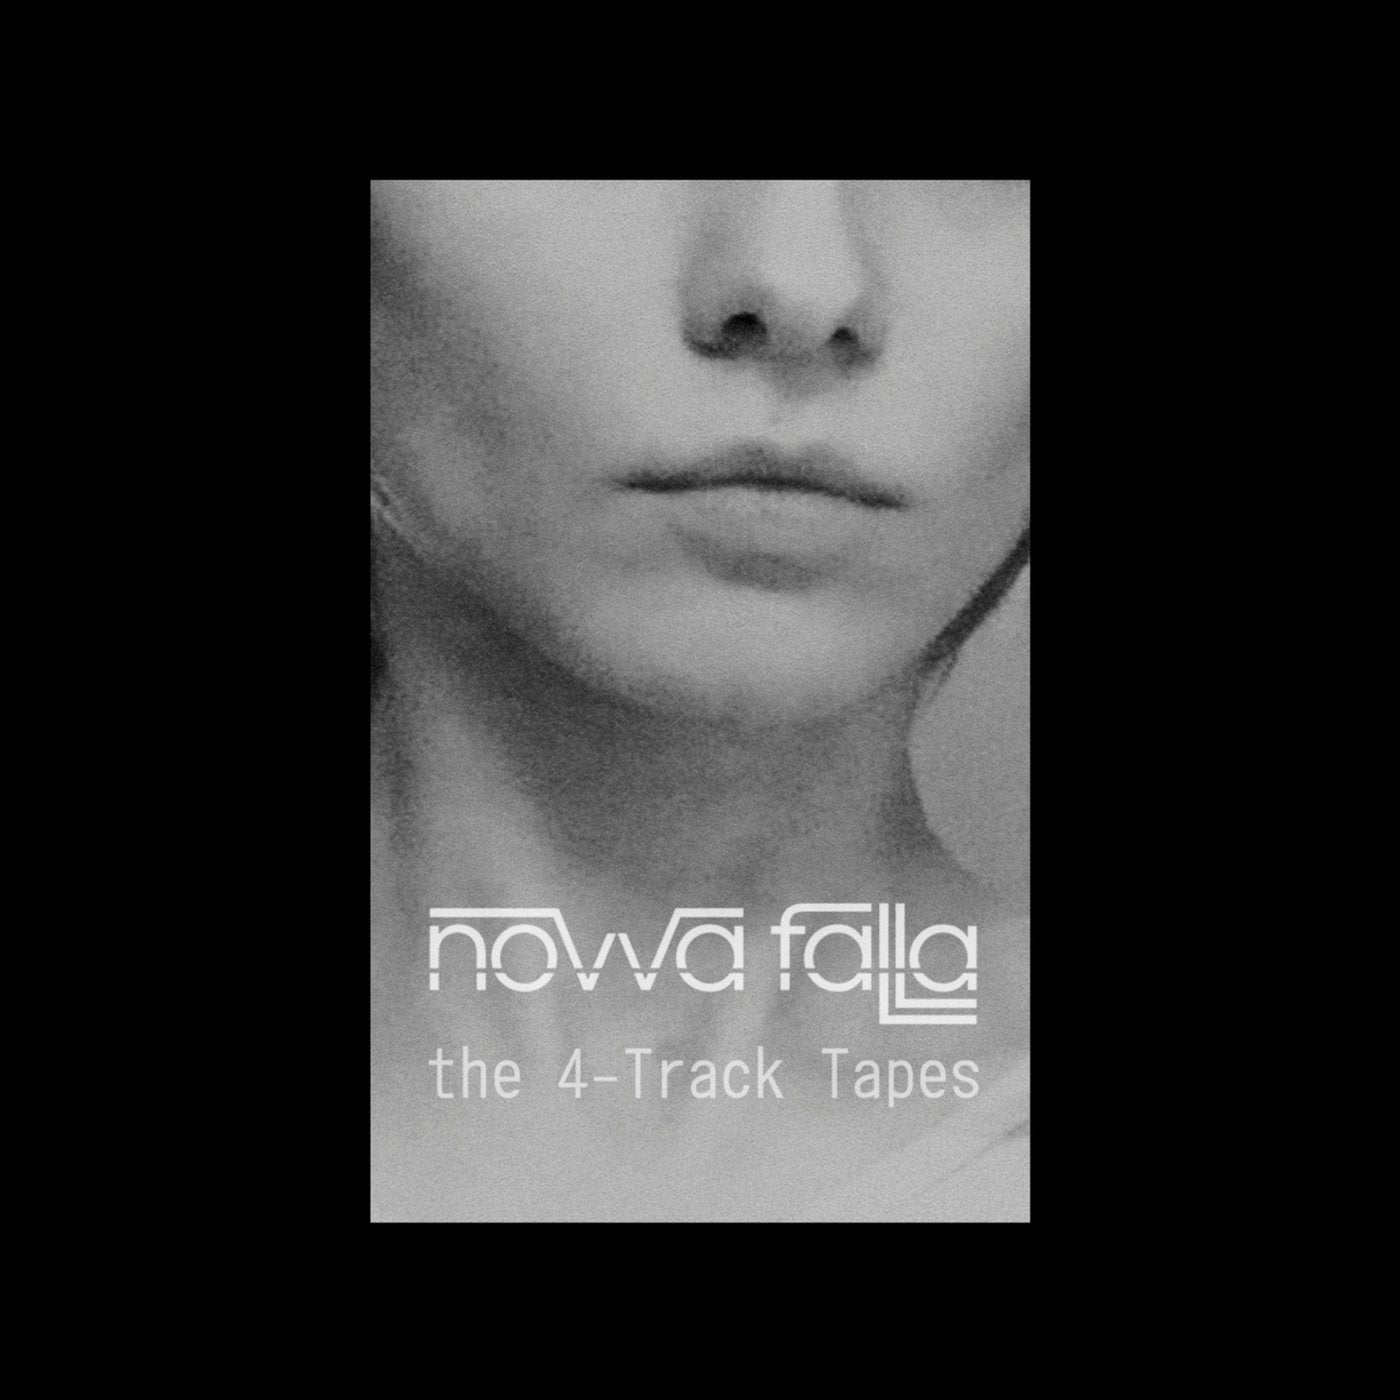 The 4-Track Tapes